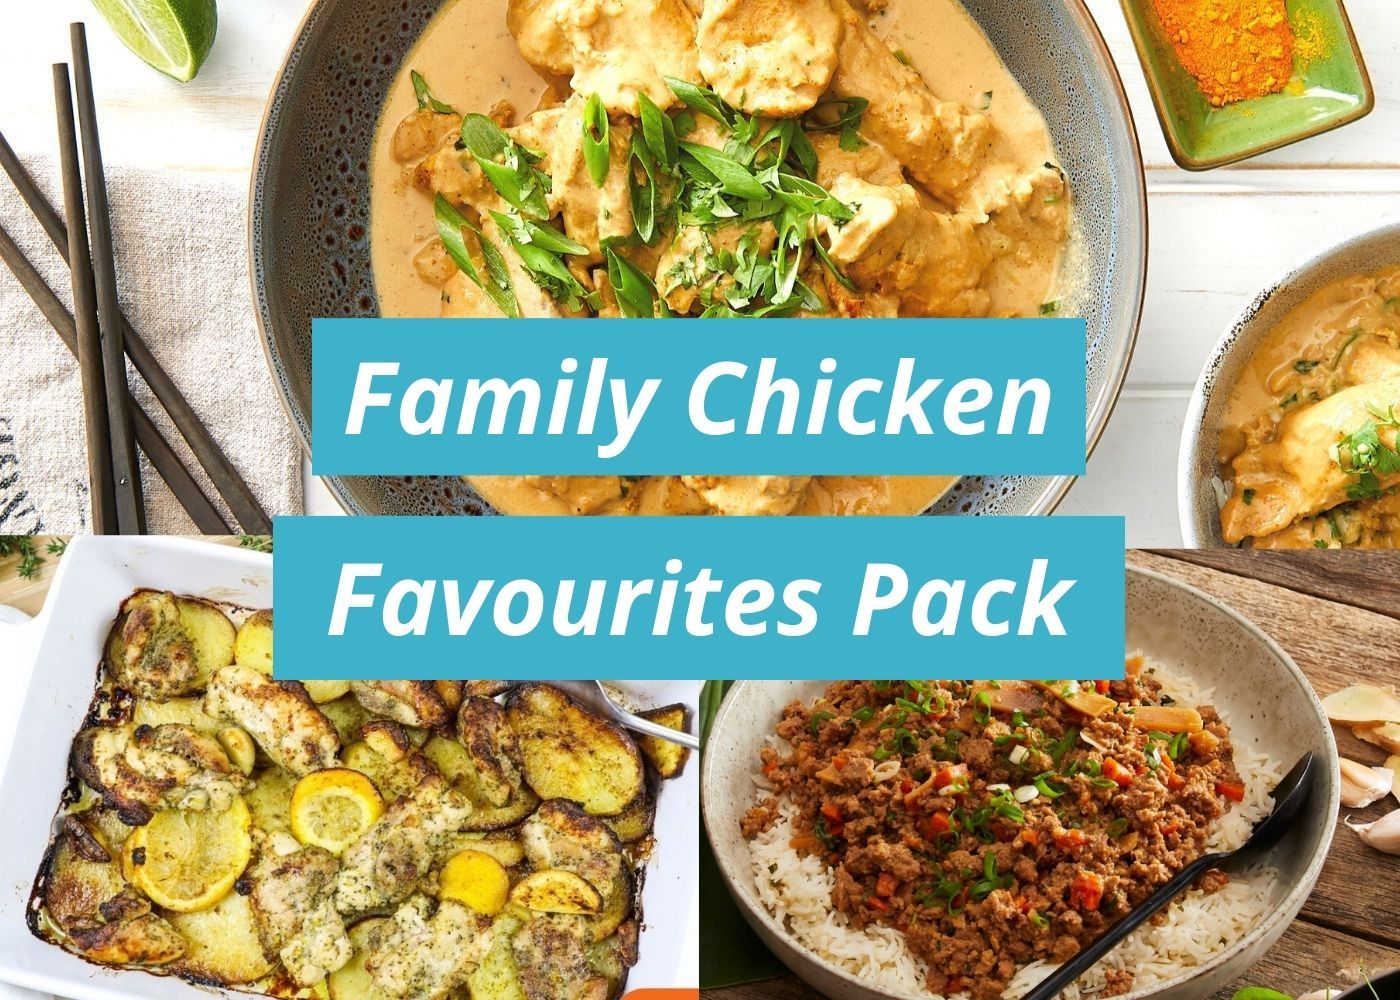 Family Chicken Favourites Pack